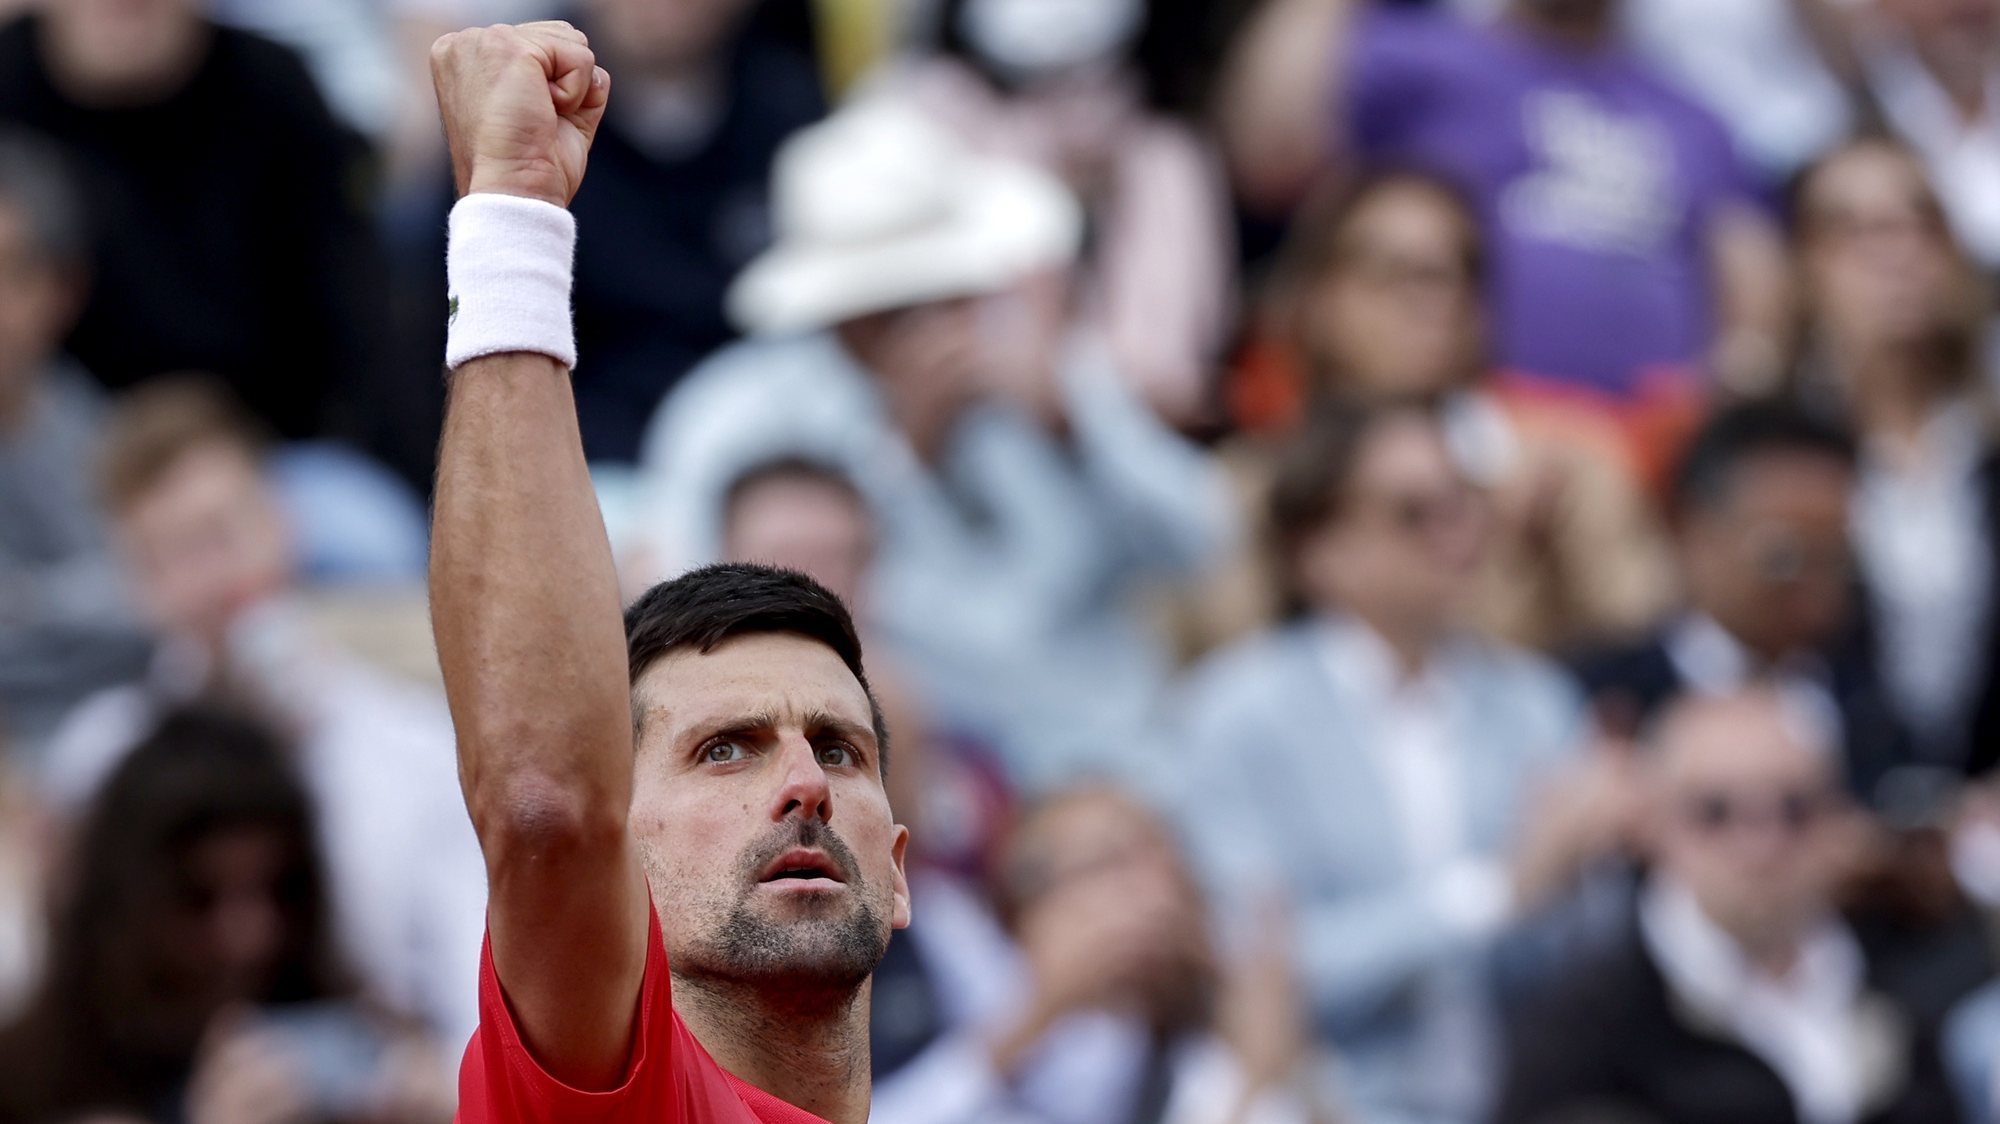 epa09984204 Novak Djokovic of Serbia reacts as he plays Diego Schwartzman of Argentina in their men’s fourth round match during the French Open tennis tournament at Roland ​Garros in Paris, France, 29 May 2022.  EPA/CHRISTOPHE PETIT TESSON